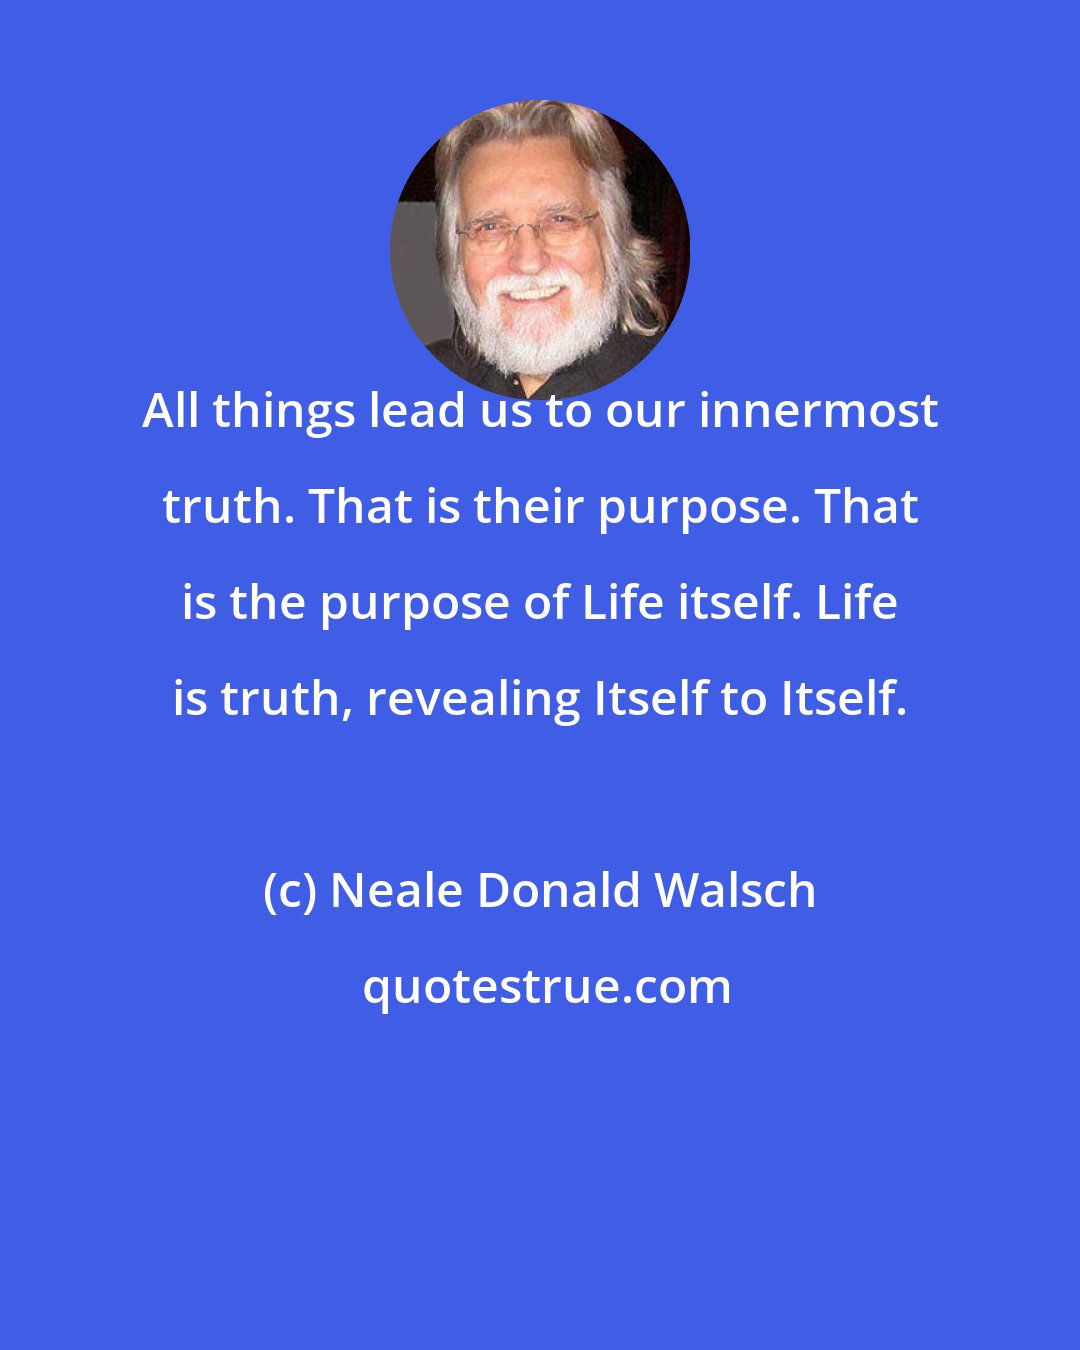 Neale Donald Walsch: All things lead us to our innermost truth. That is their purpose. That is the purpose of Life itself. Life is truth, revealing Itself to Itself.